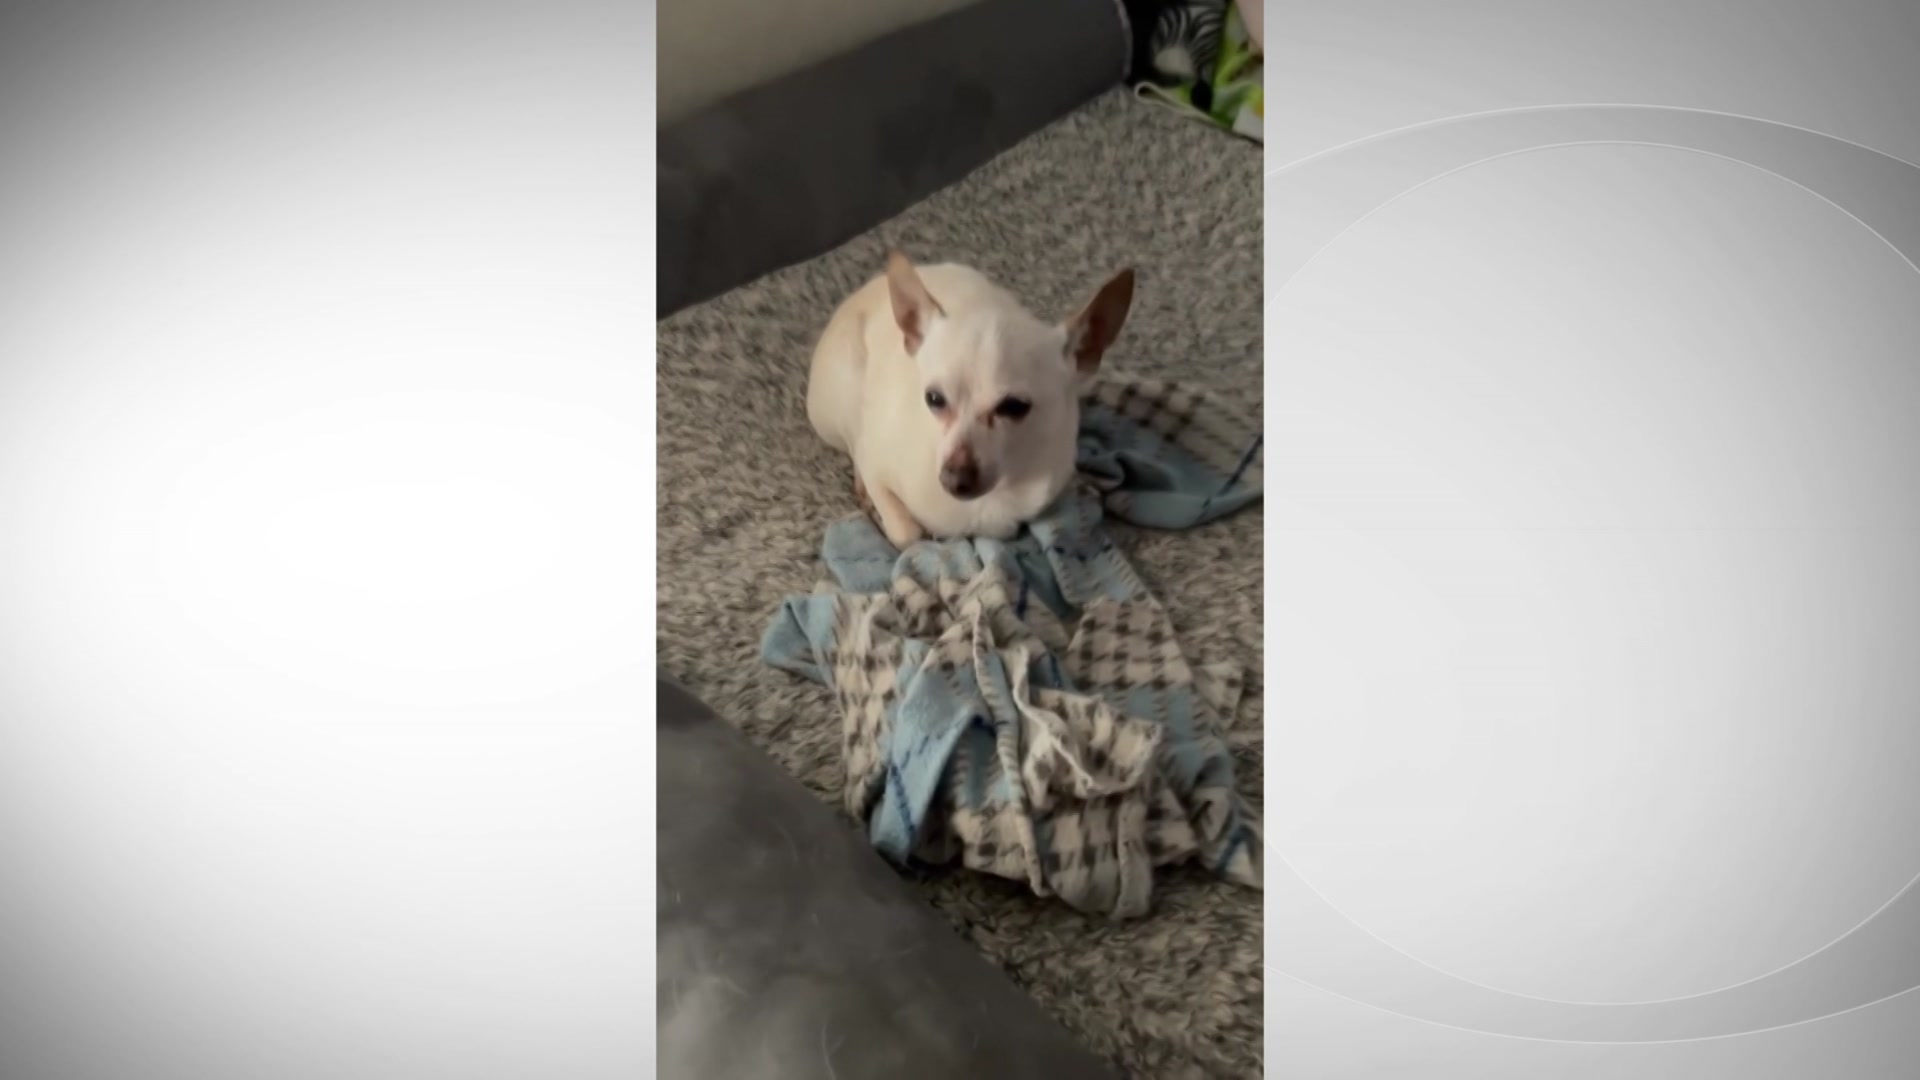 TobyKeith, A 21-Year-Old Chihuahua From Florida, Is Officially The World’s Oldest Dog